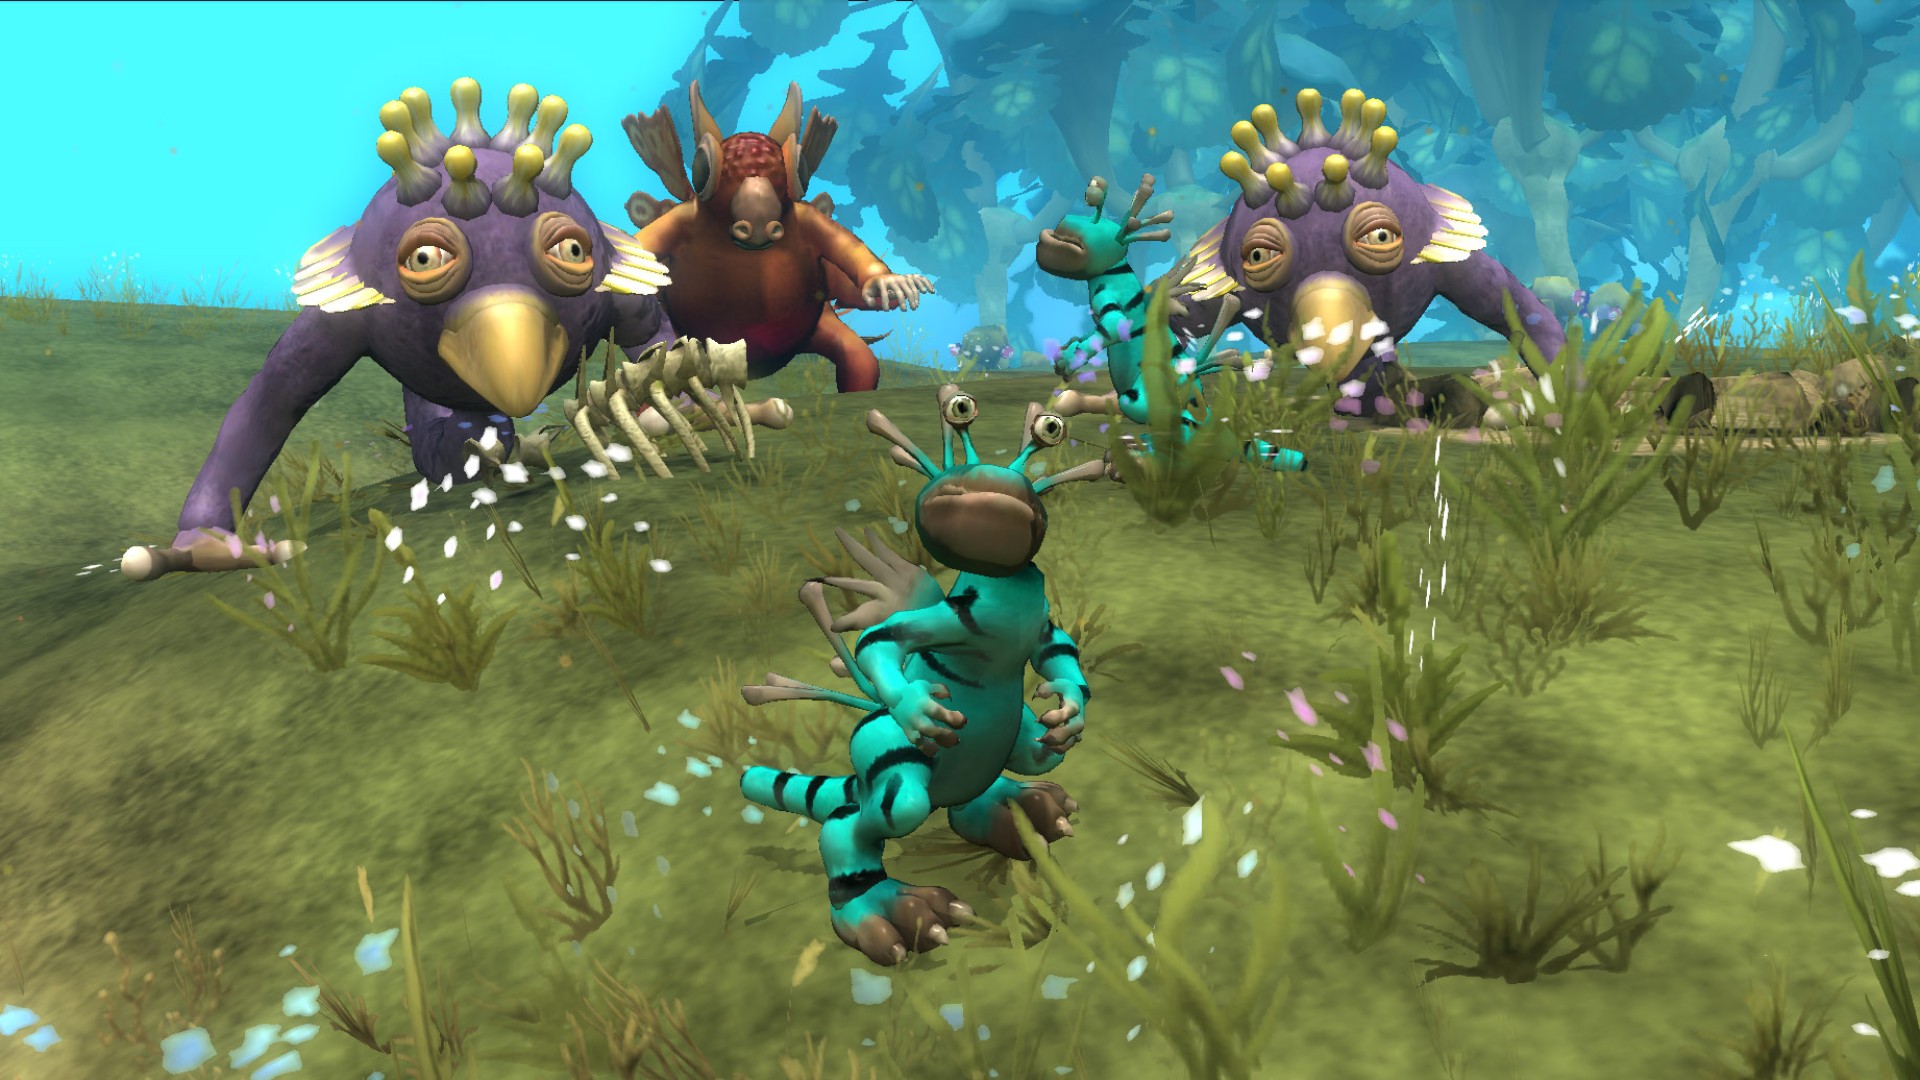 Forget Civilization 7, I want a new Spore game already